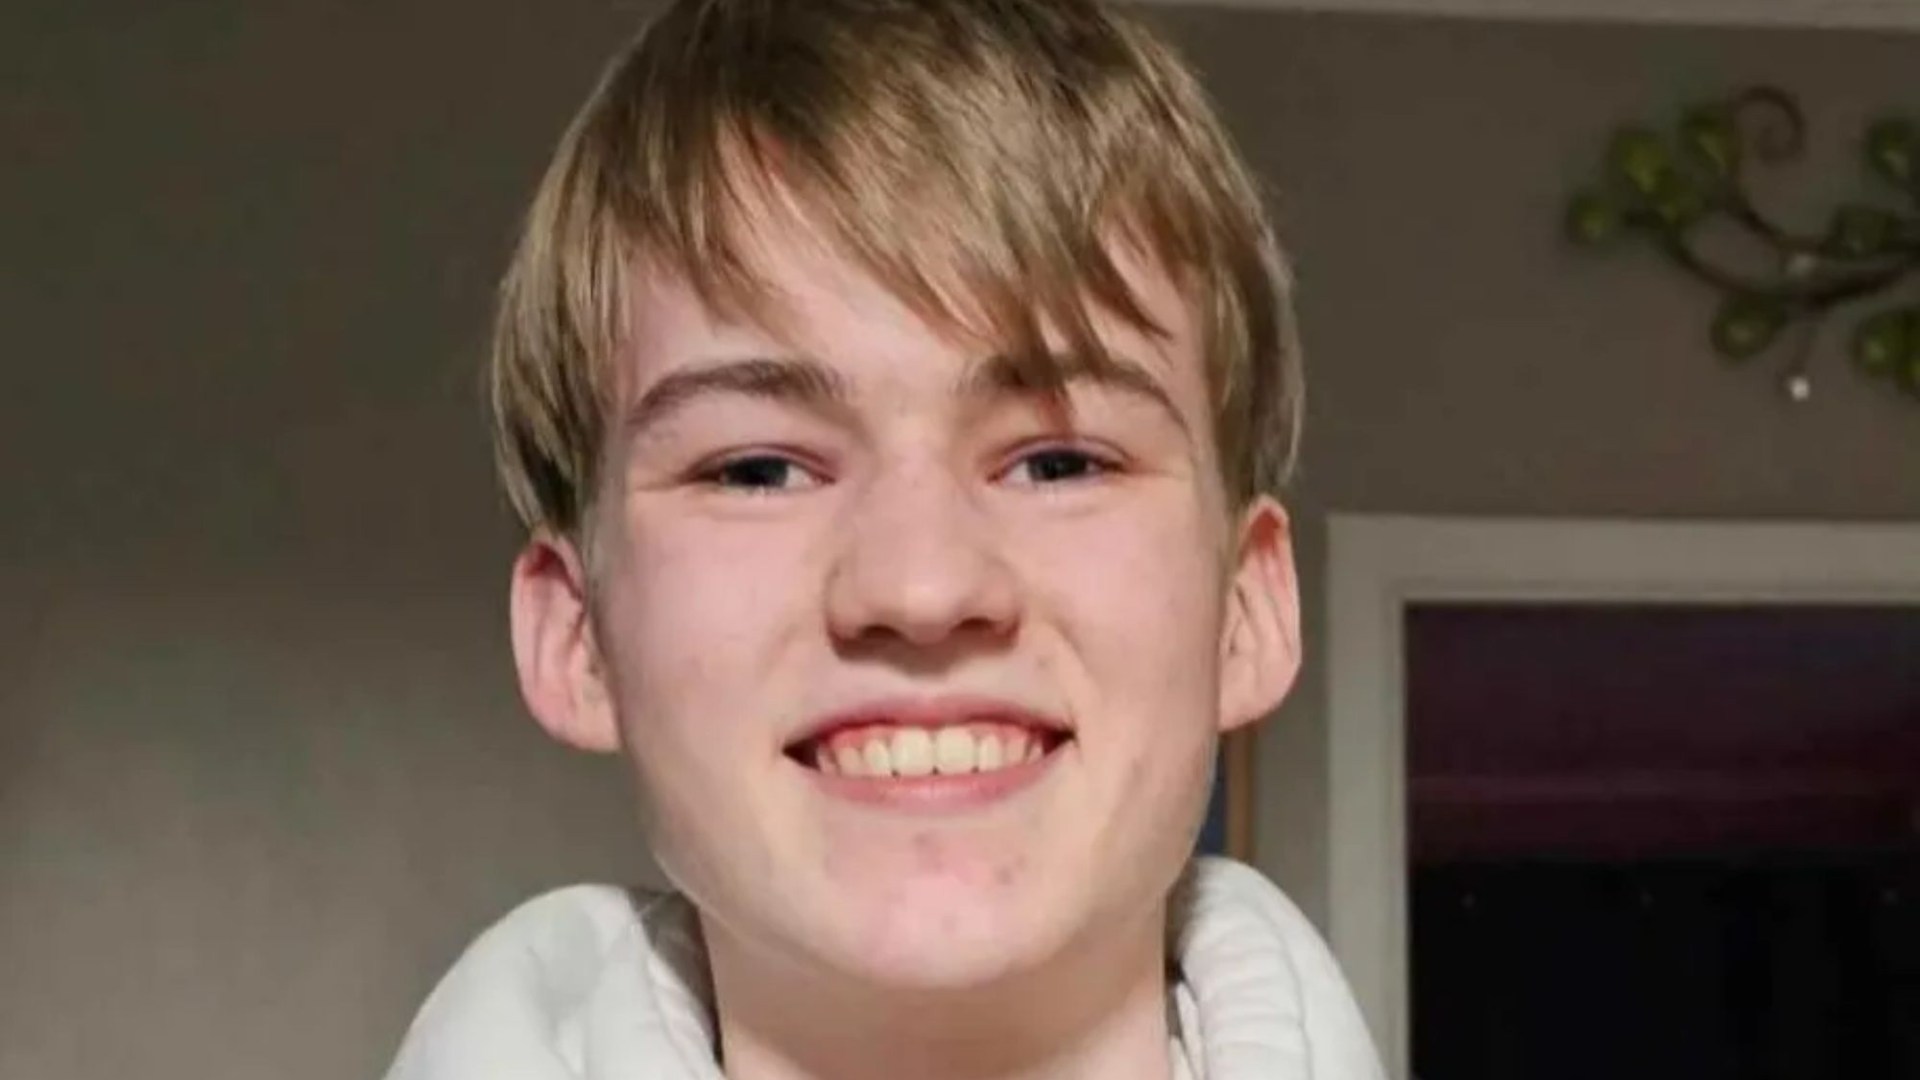 Mum’s disbelief as ‘healthy’ son, 16, dies within days of complaining of a sore throat [Video]